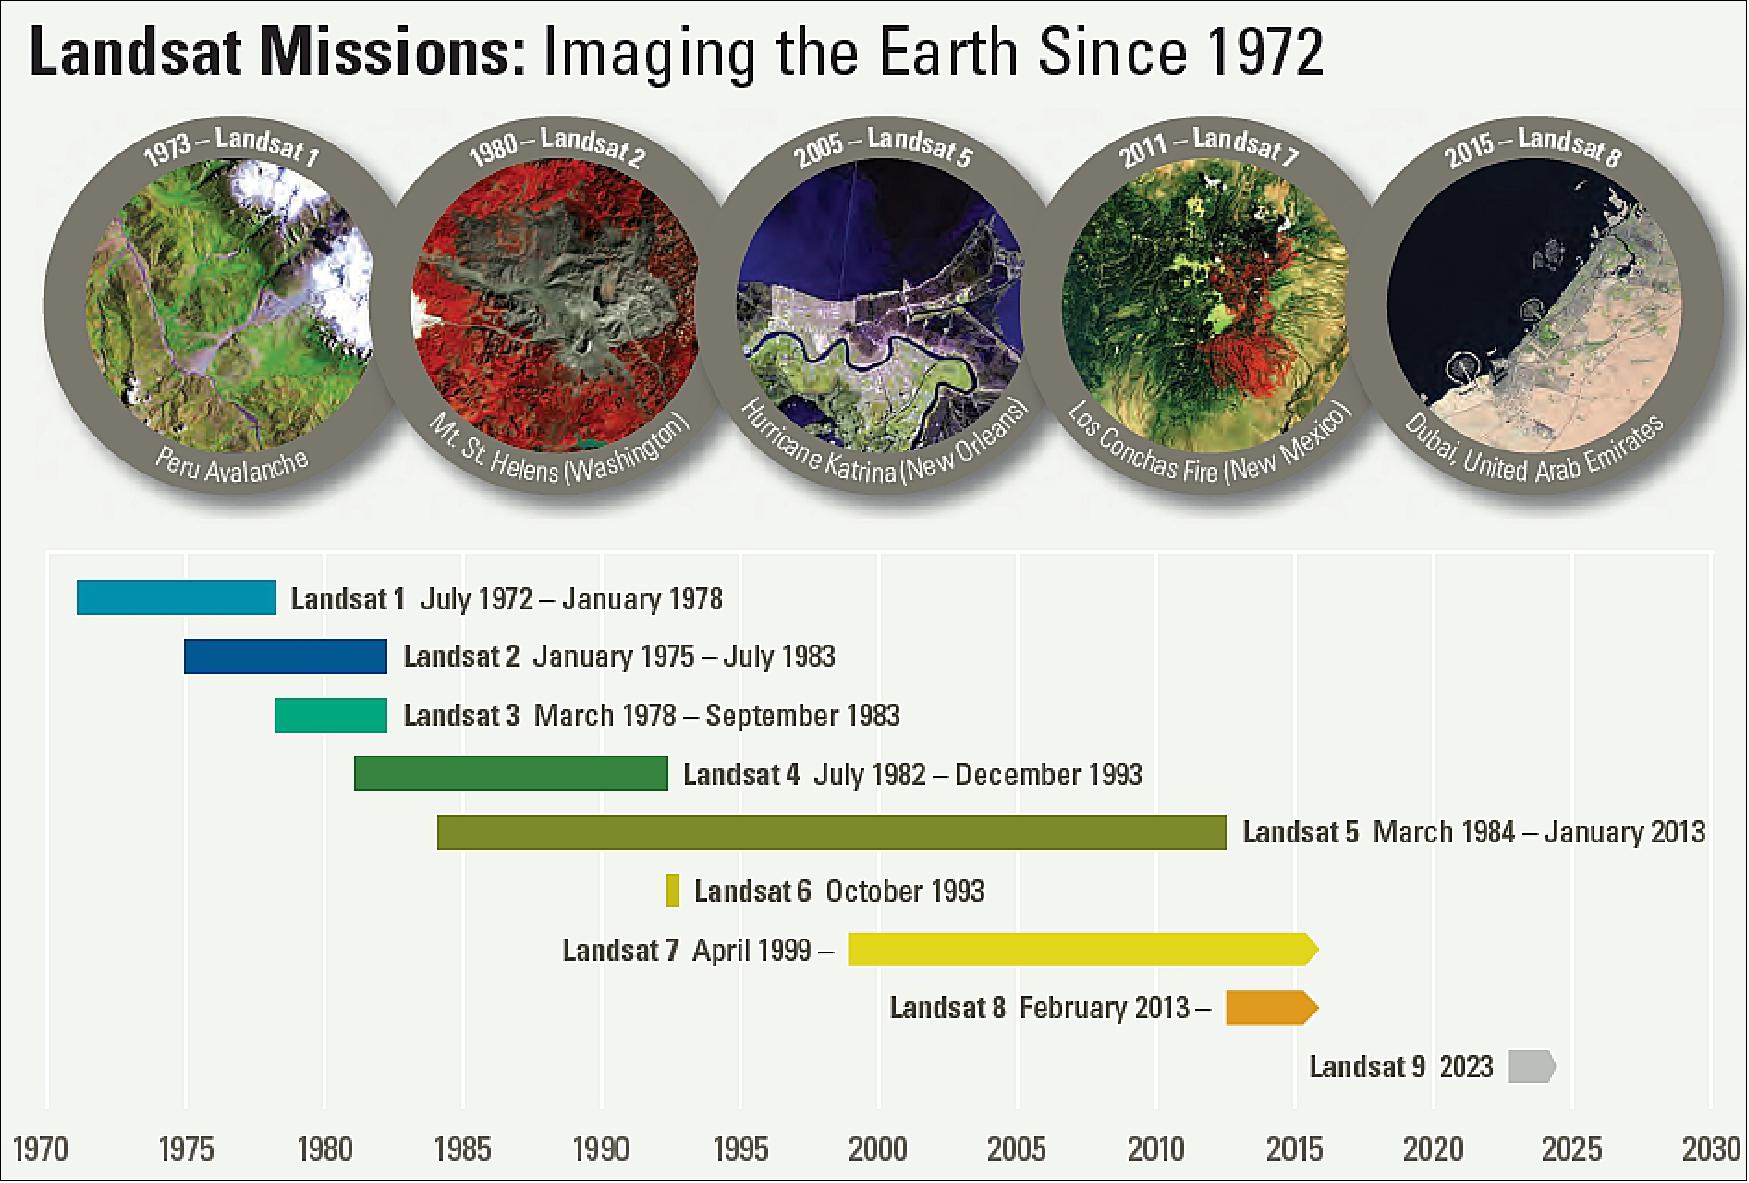 Figure 39: Timeline and history of the Landsat Missions, which started in 1972 (image credit: USGS, Ref. 43)